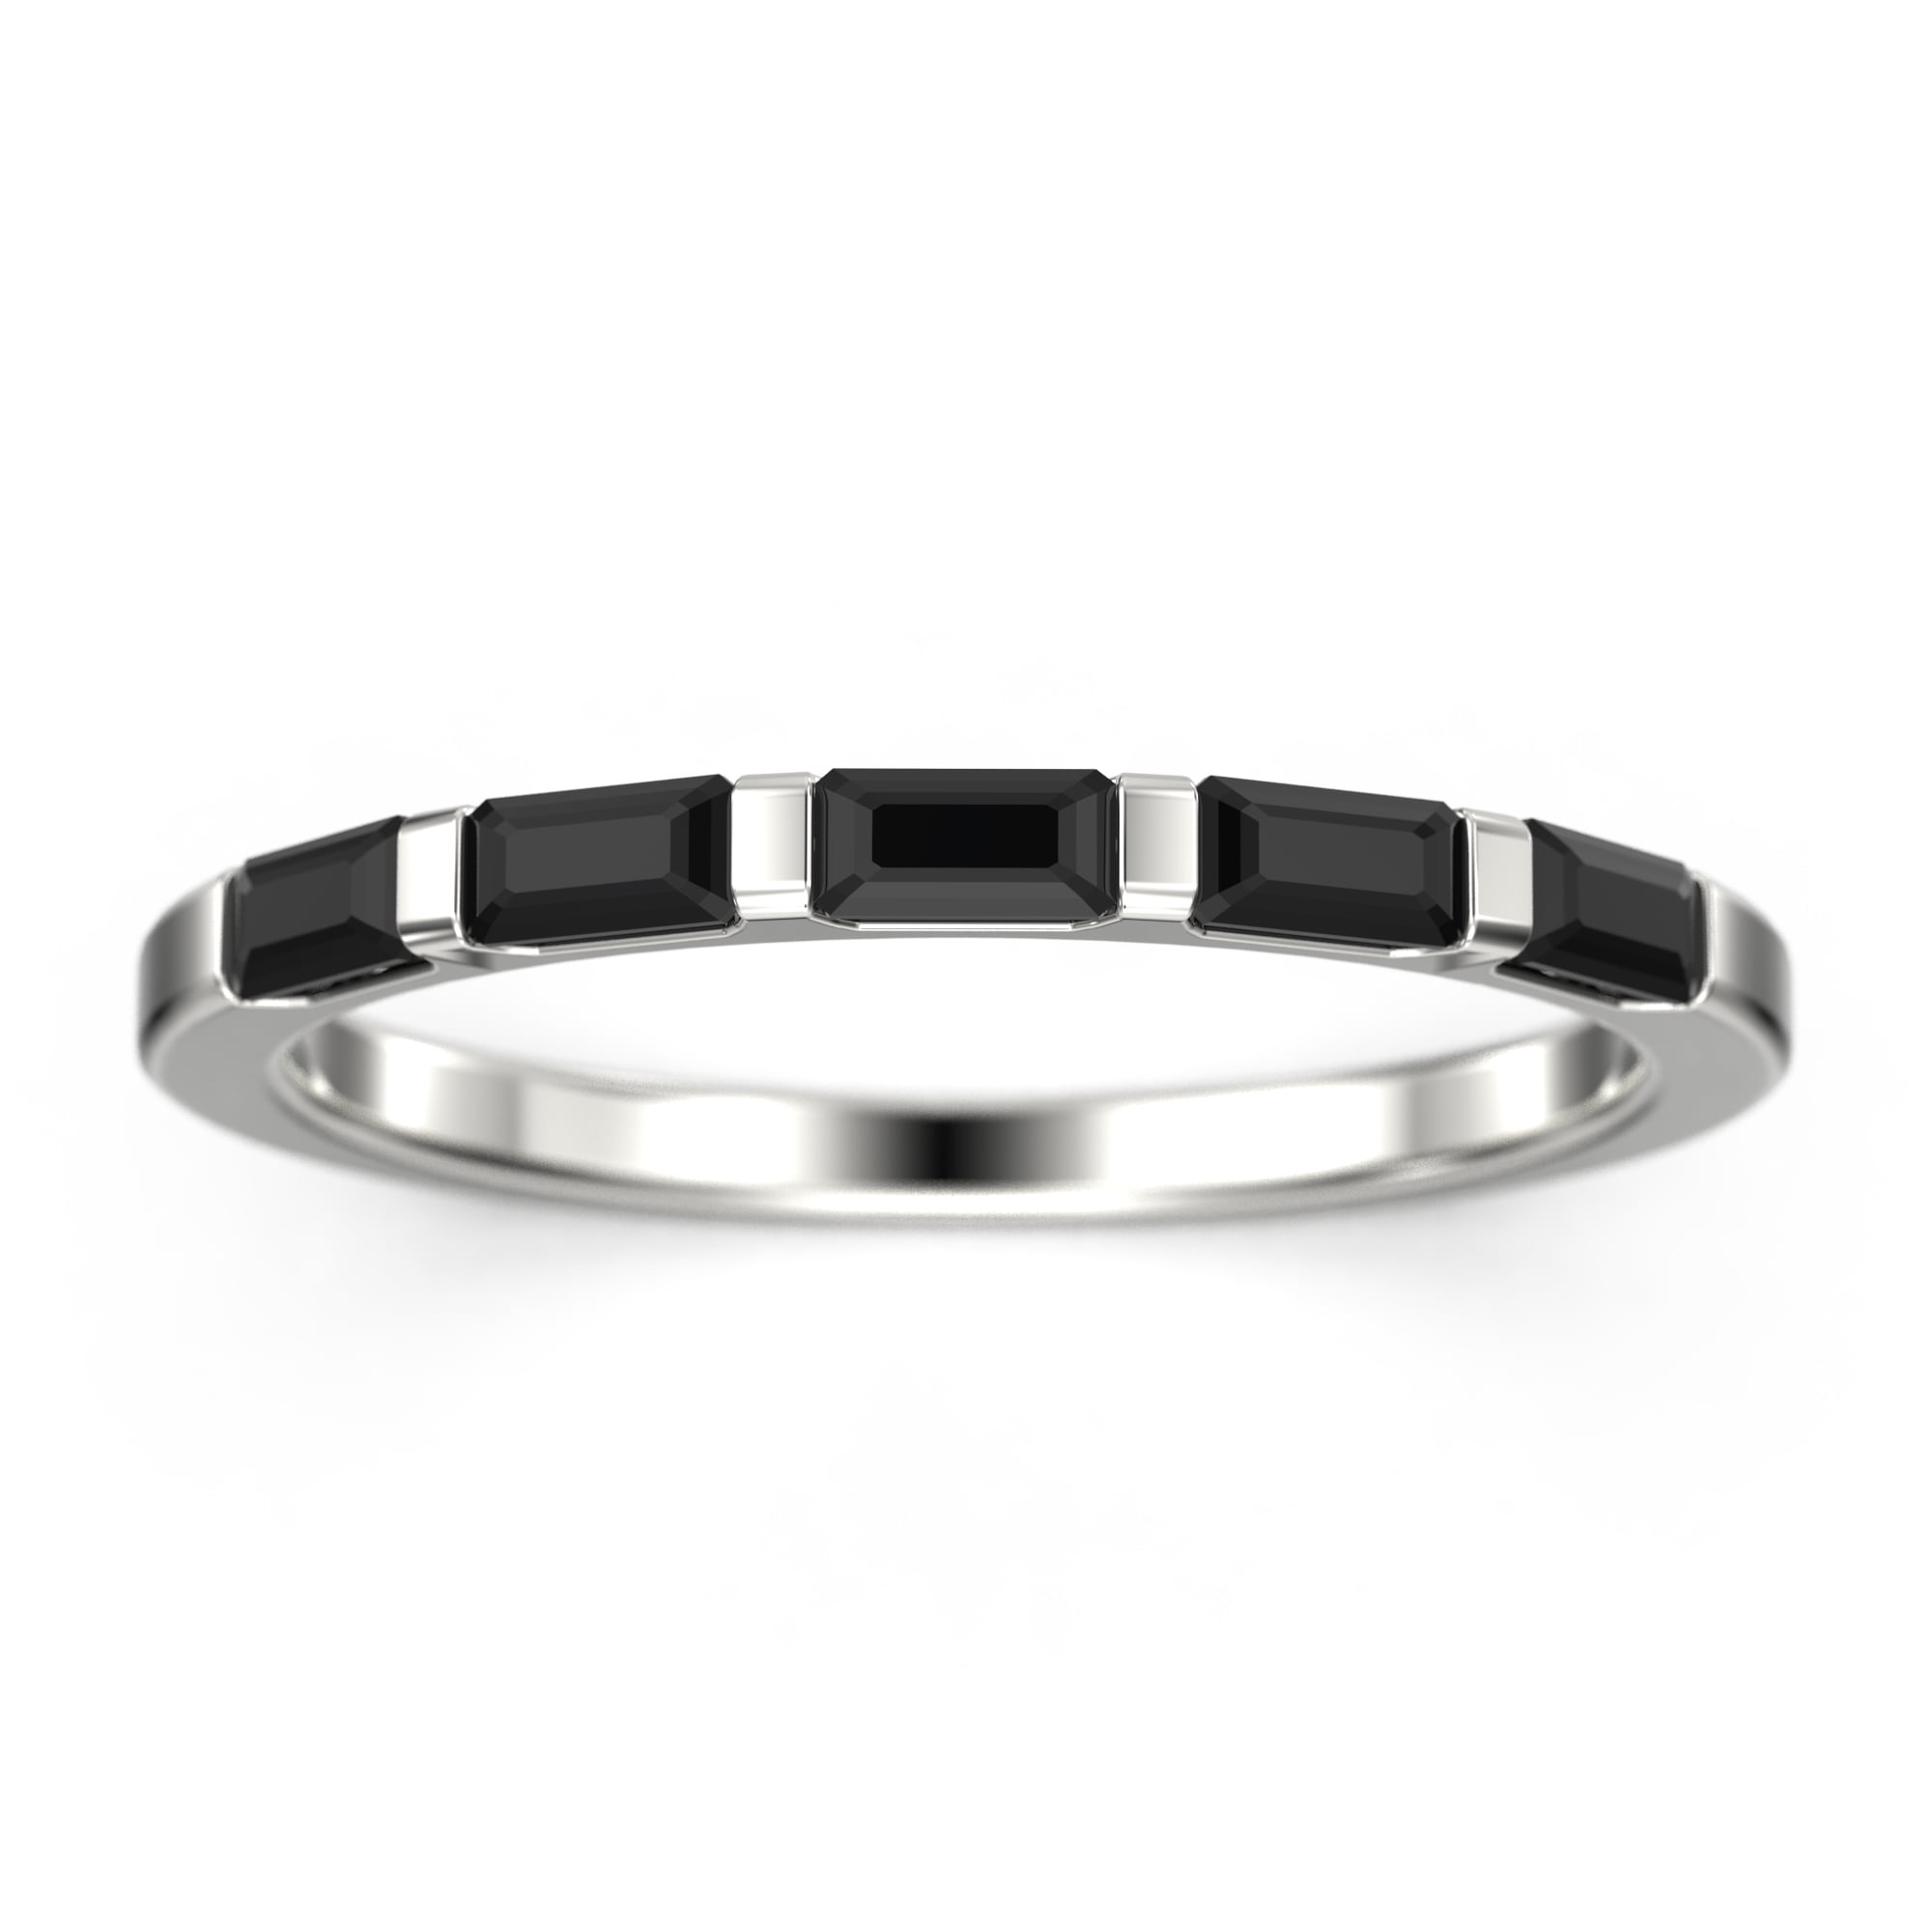 Details about   Men Fashion 6MM Stainless Steel Single CZ Bezel Set Wedding Band Ring